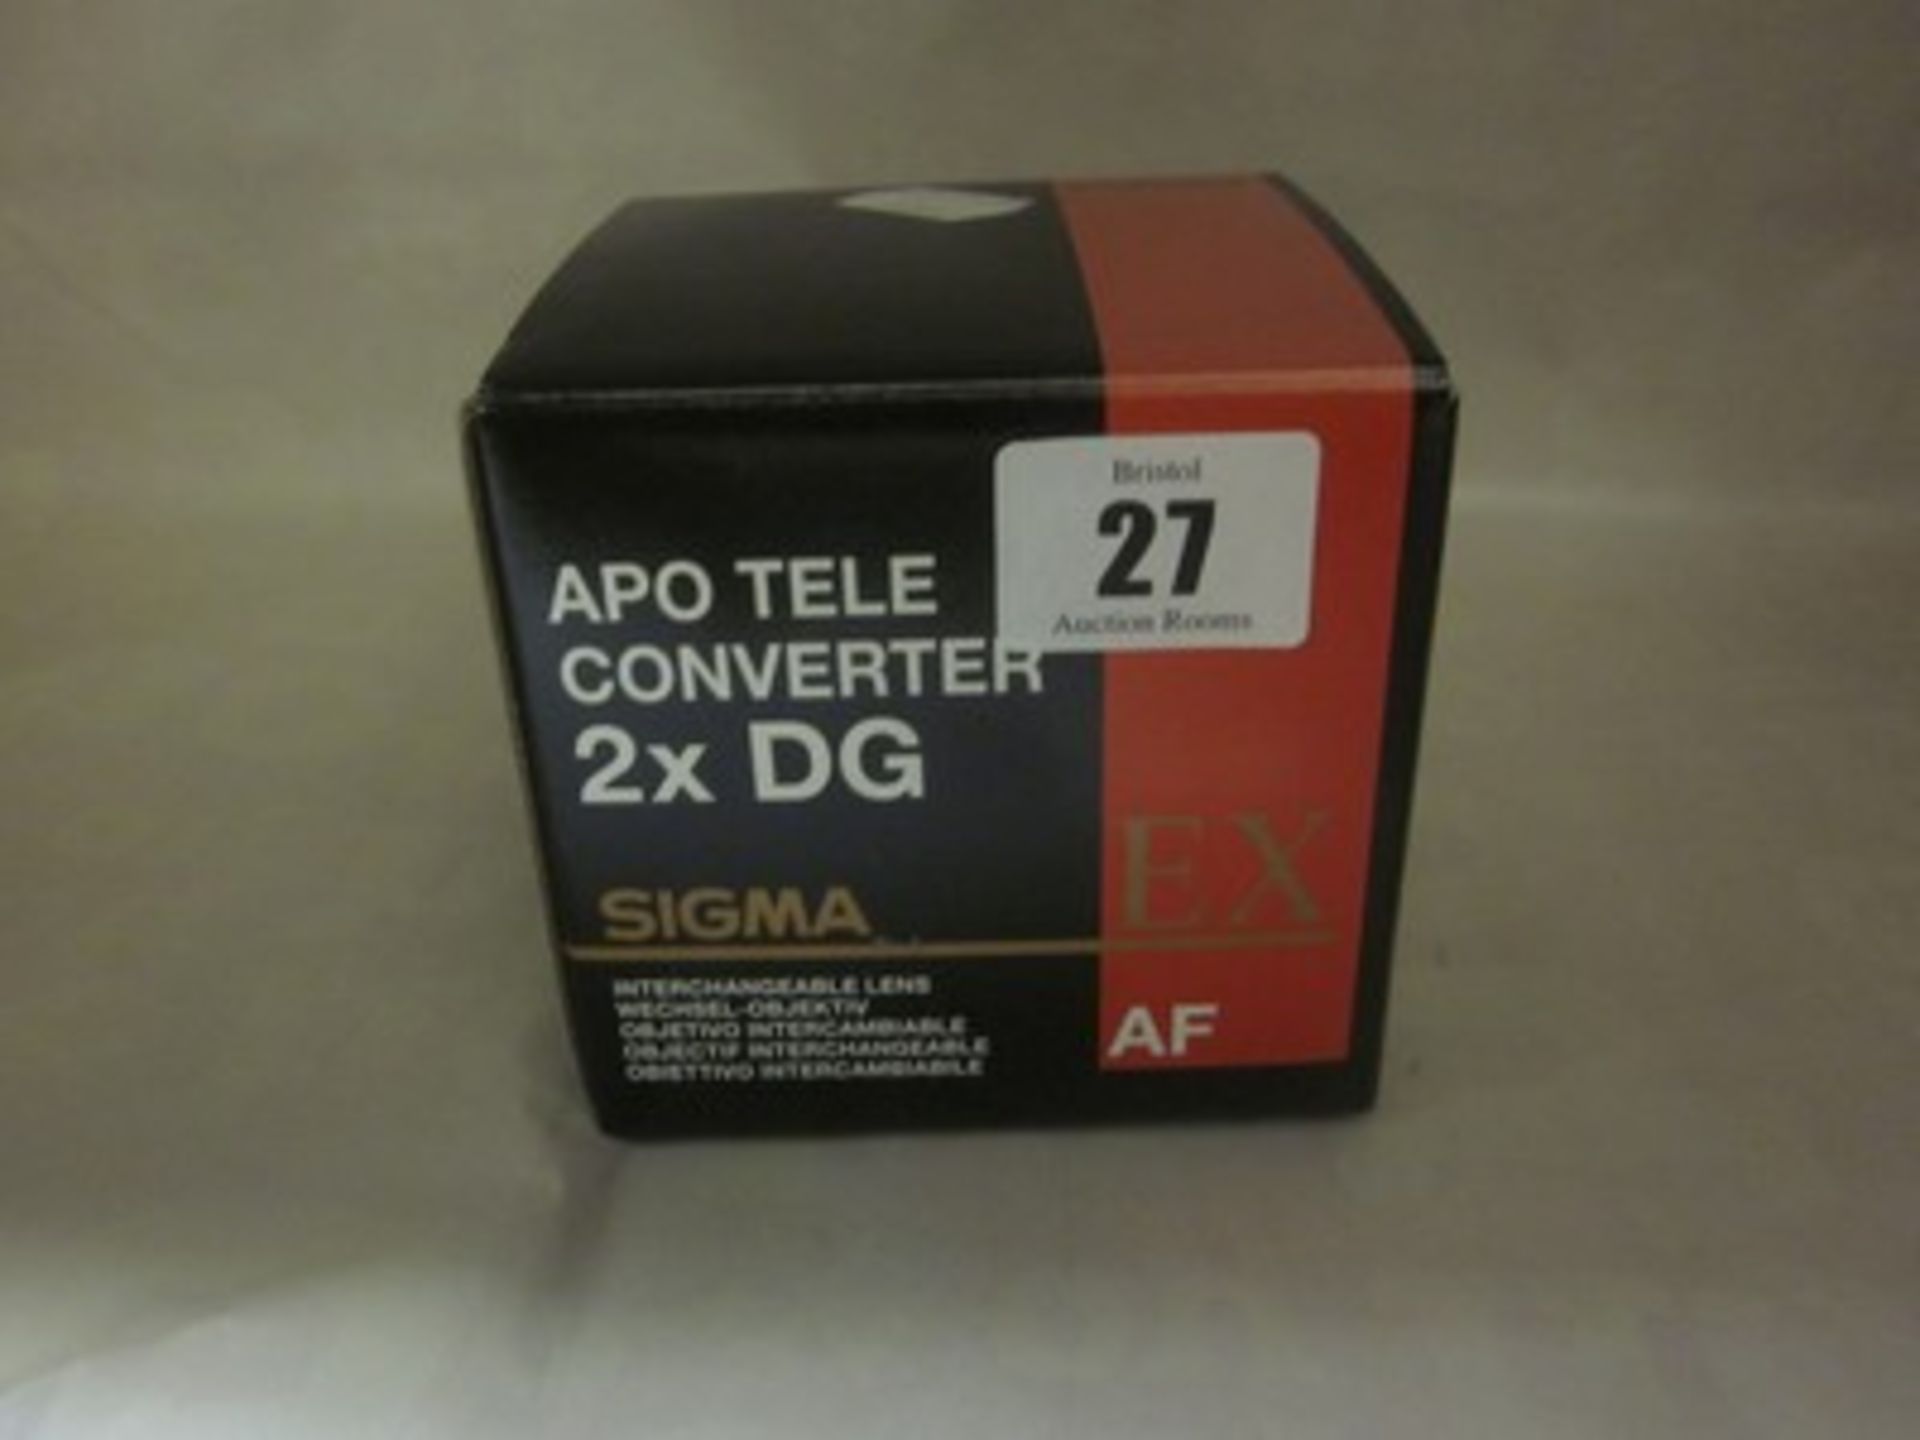 *A Sigma Apo tele converter 2x DG interchangeable lens for Canon (Boxed as new).Payment and